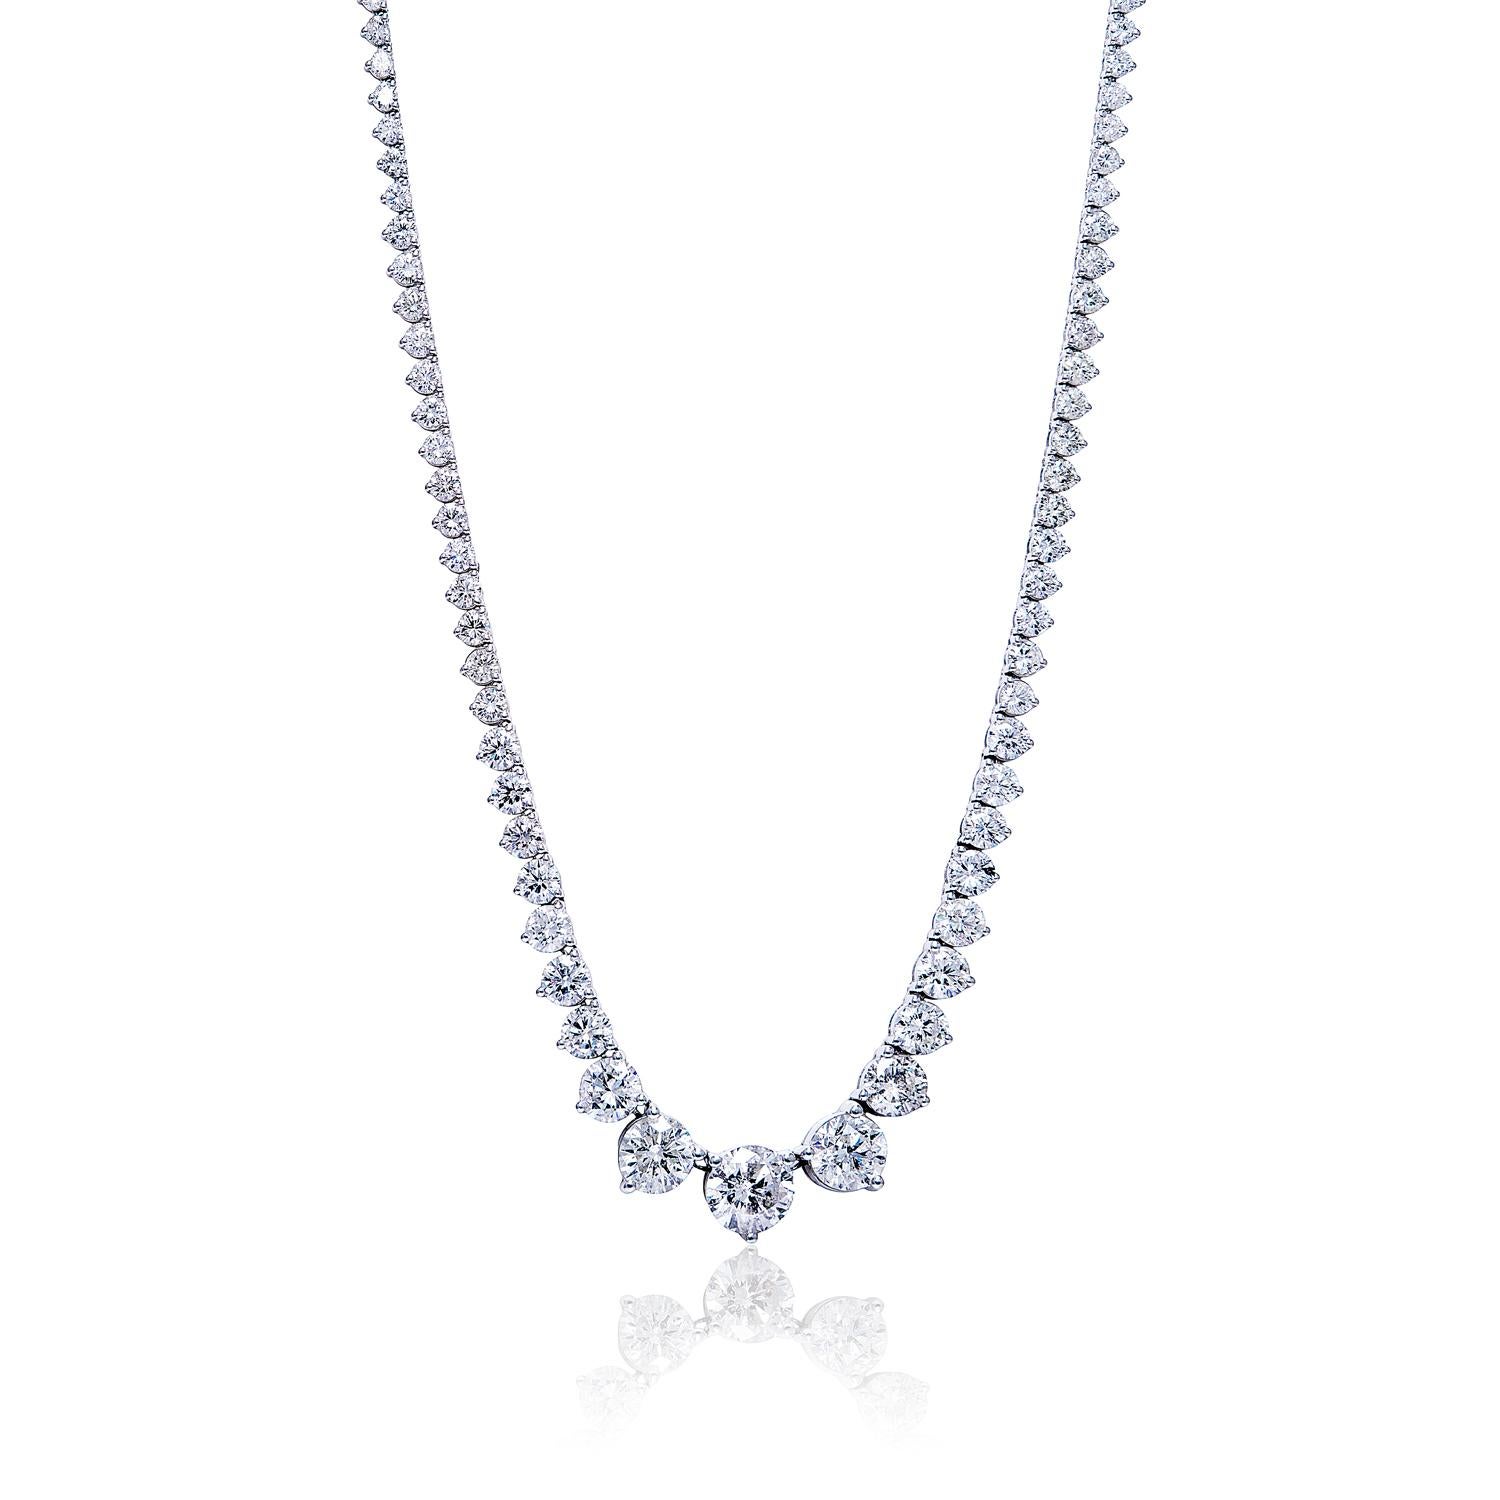 Looking for a sophisticated and elegant piece to add to your jewelry collection? Look no further than an earth-mined diamond necklace for ladies. This stunning necklace features a dazzling round brilliant cut set in 14-karat white gold chains for a